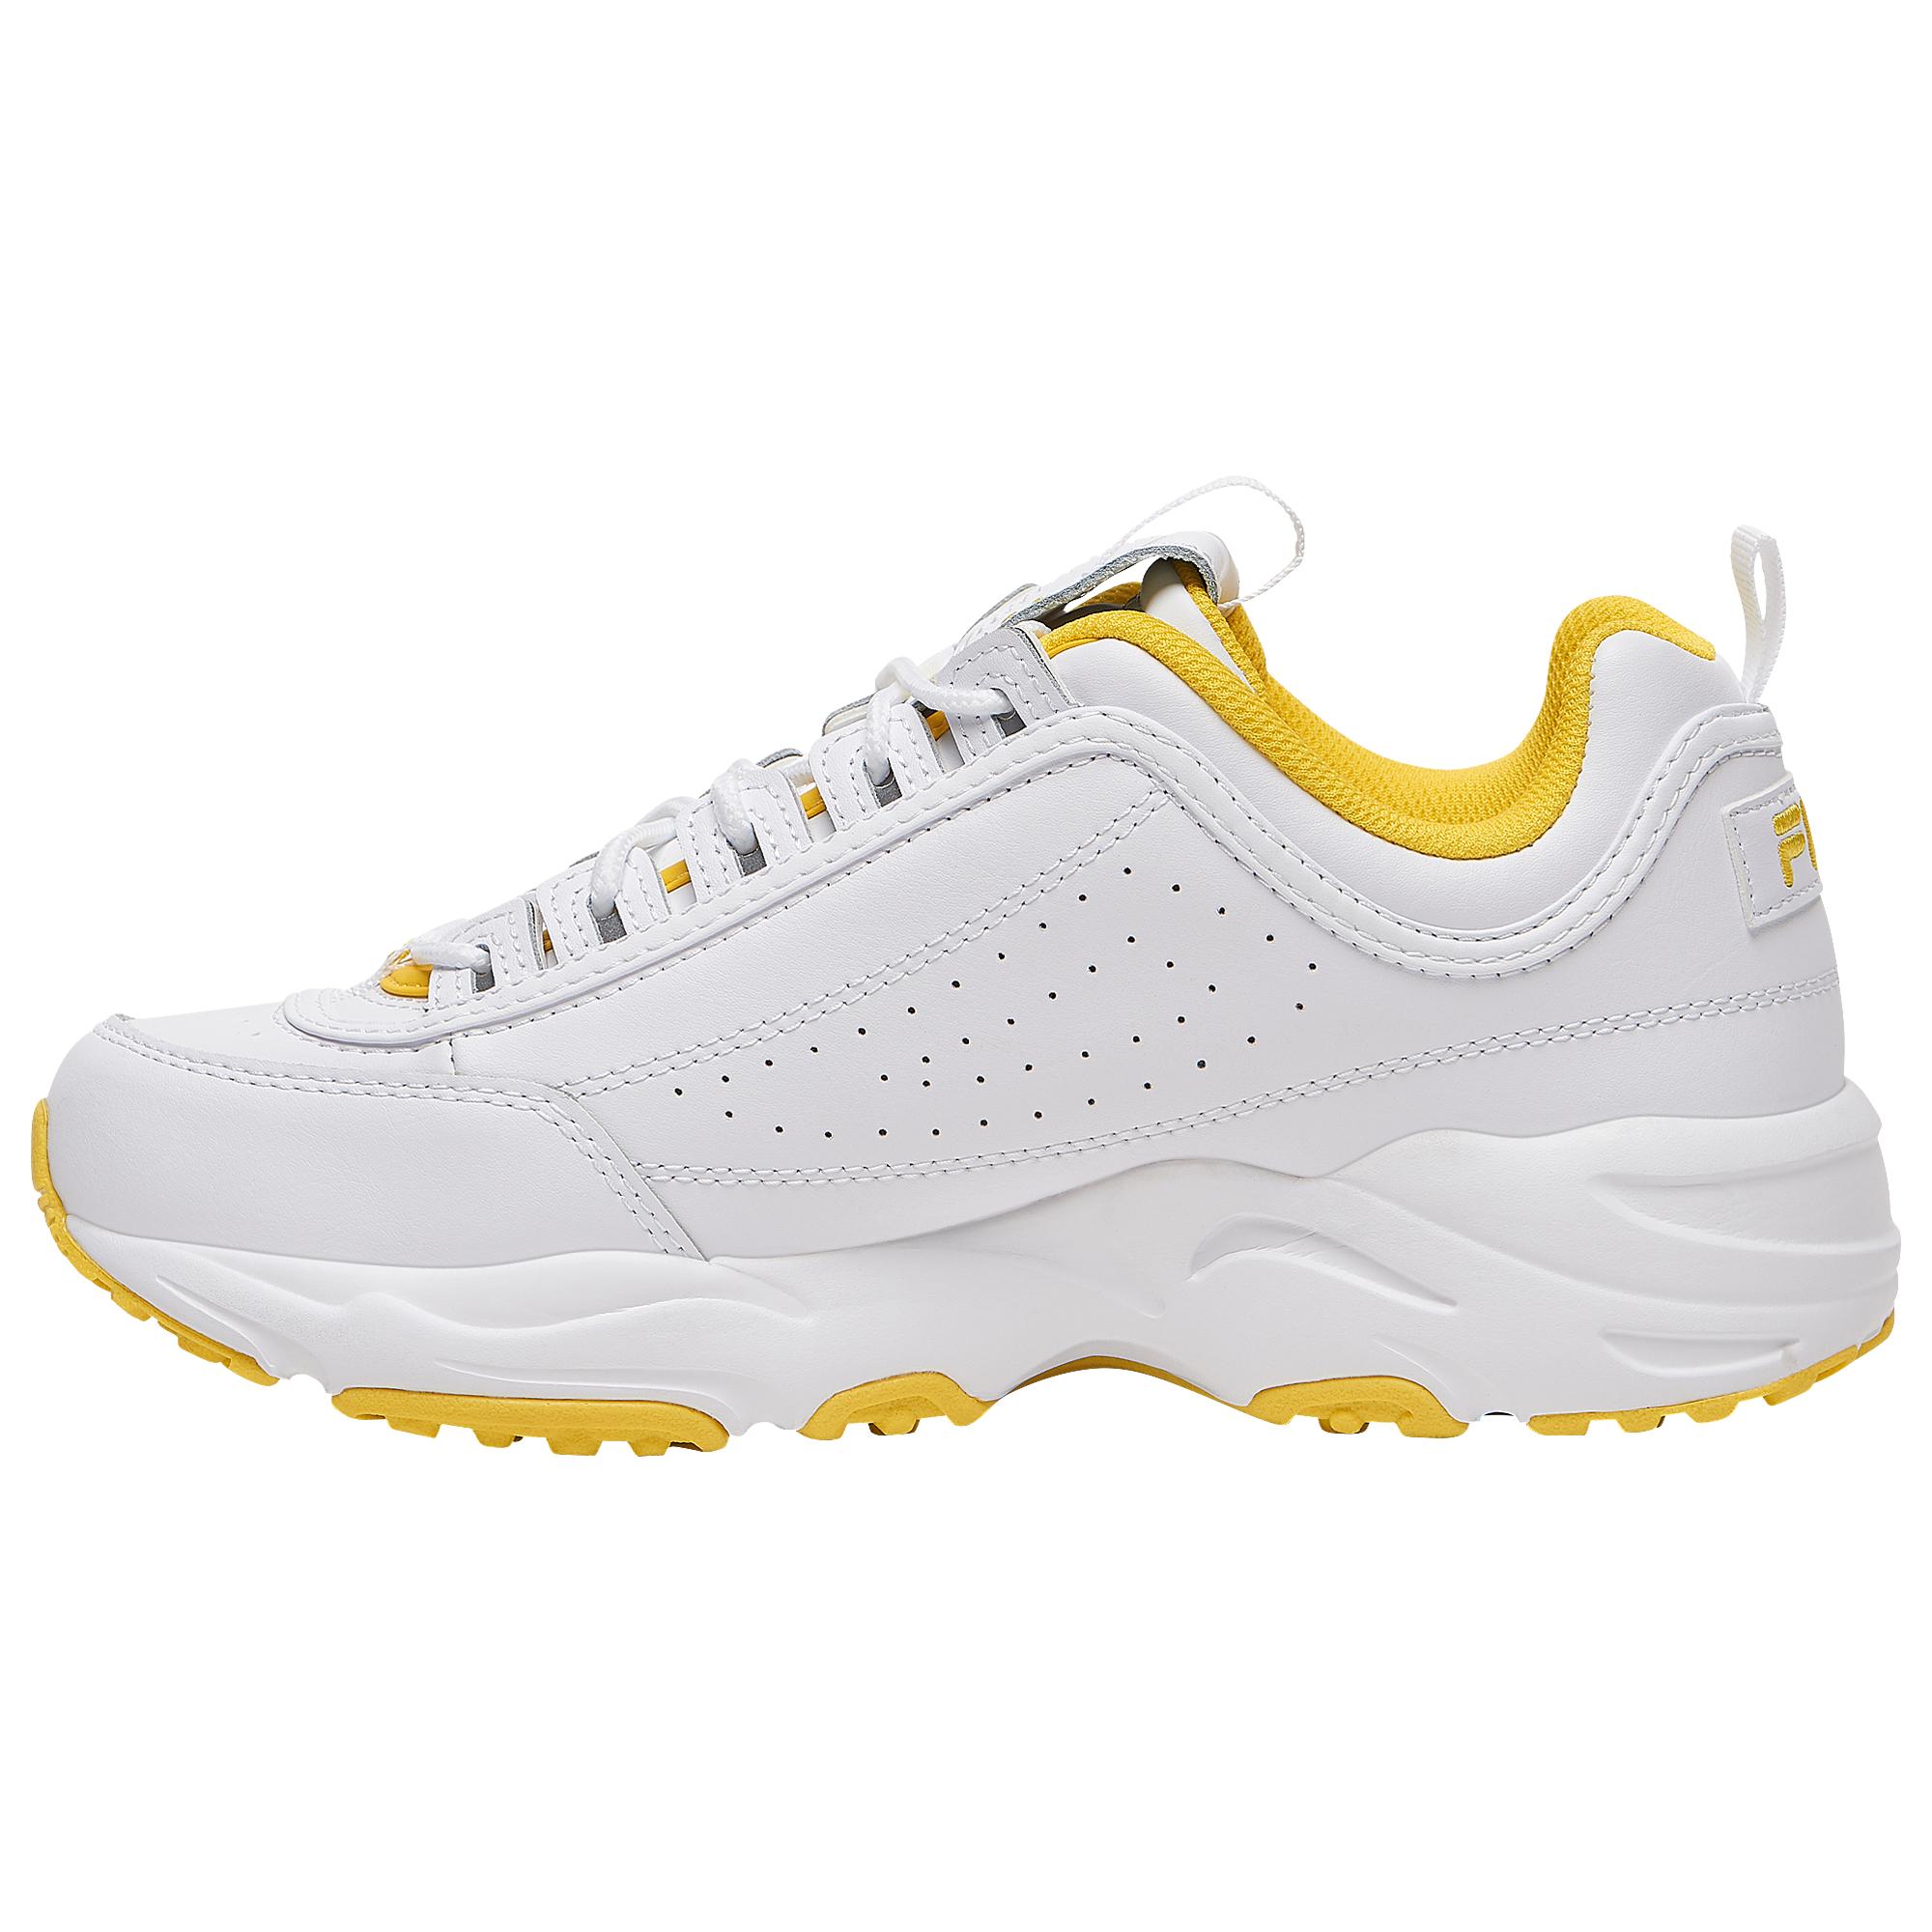 Fila Suede Disruptor Ii X Ray Tracer in White/White (White) for Men - Lyst